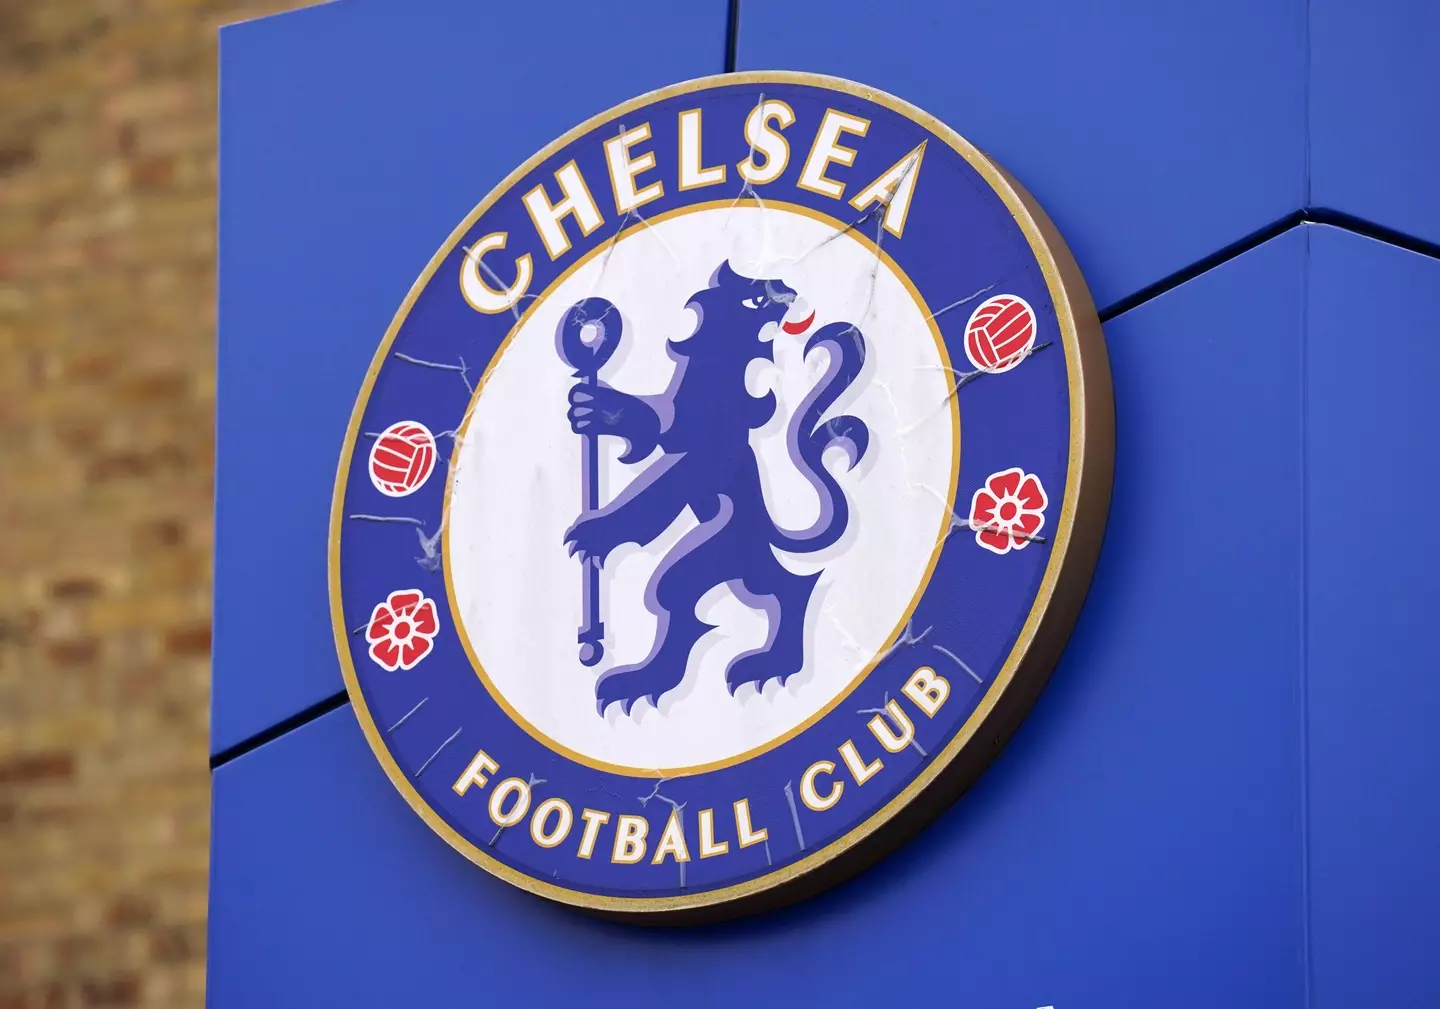 A general view of a Chelsea crest at Stamford Bridge. (Alamy)